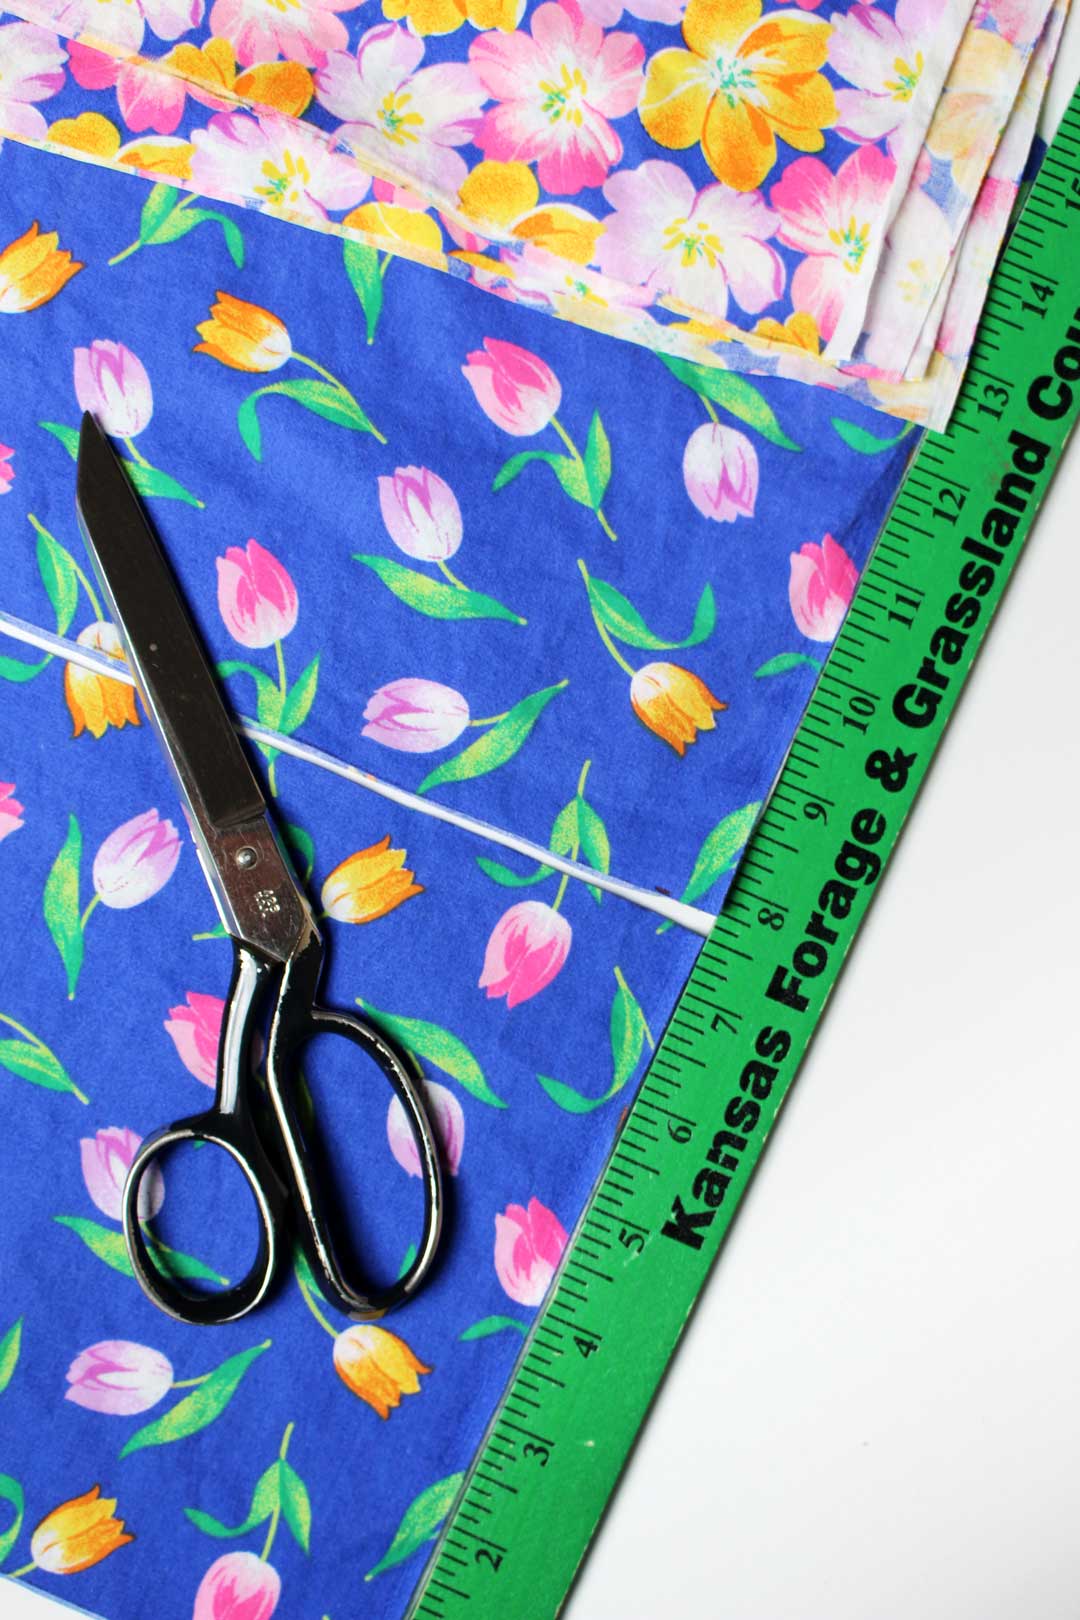 Floral fabric laying next to a ruler with a pair of fabric scissors nearby.